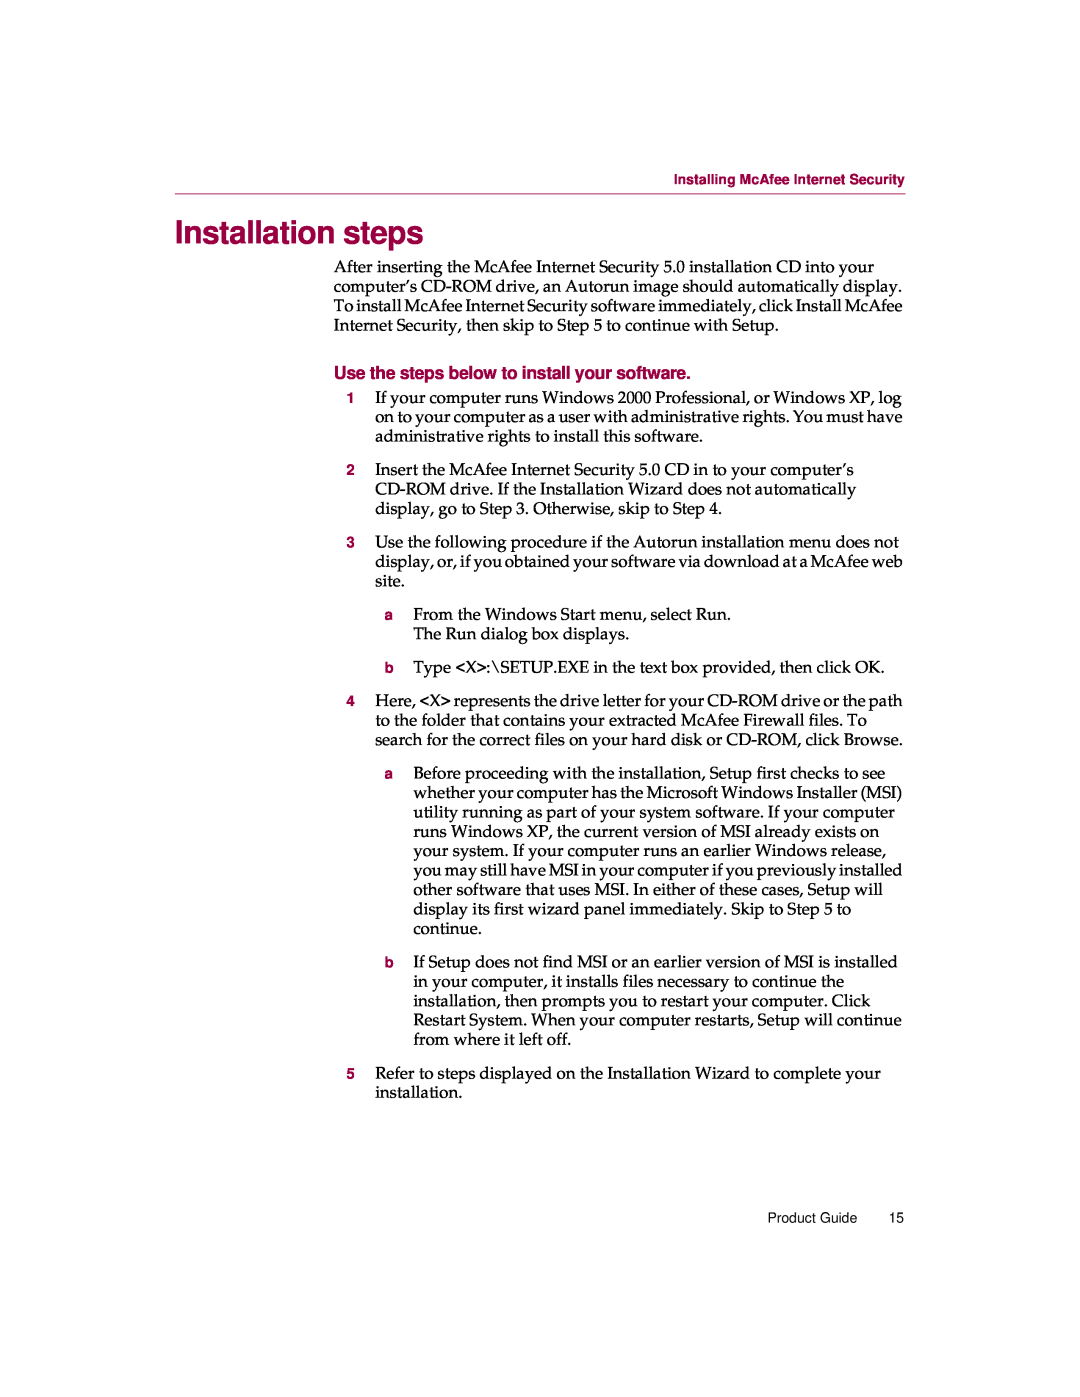 McAfee 5 manual Installation steps, Use the steps below to install your software 